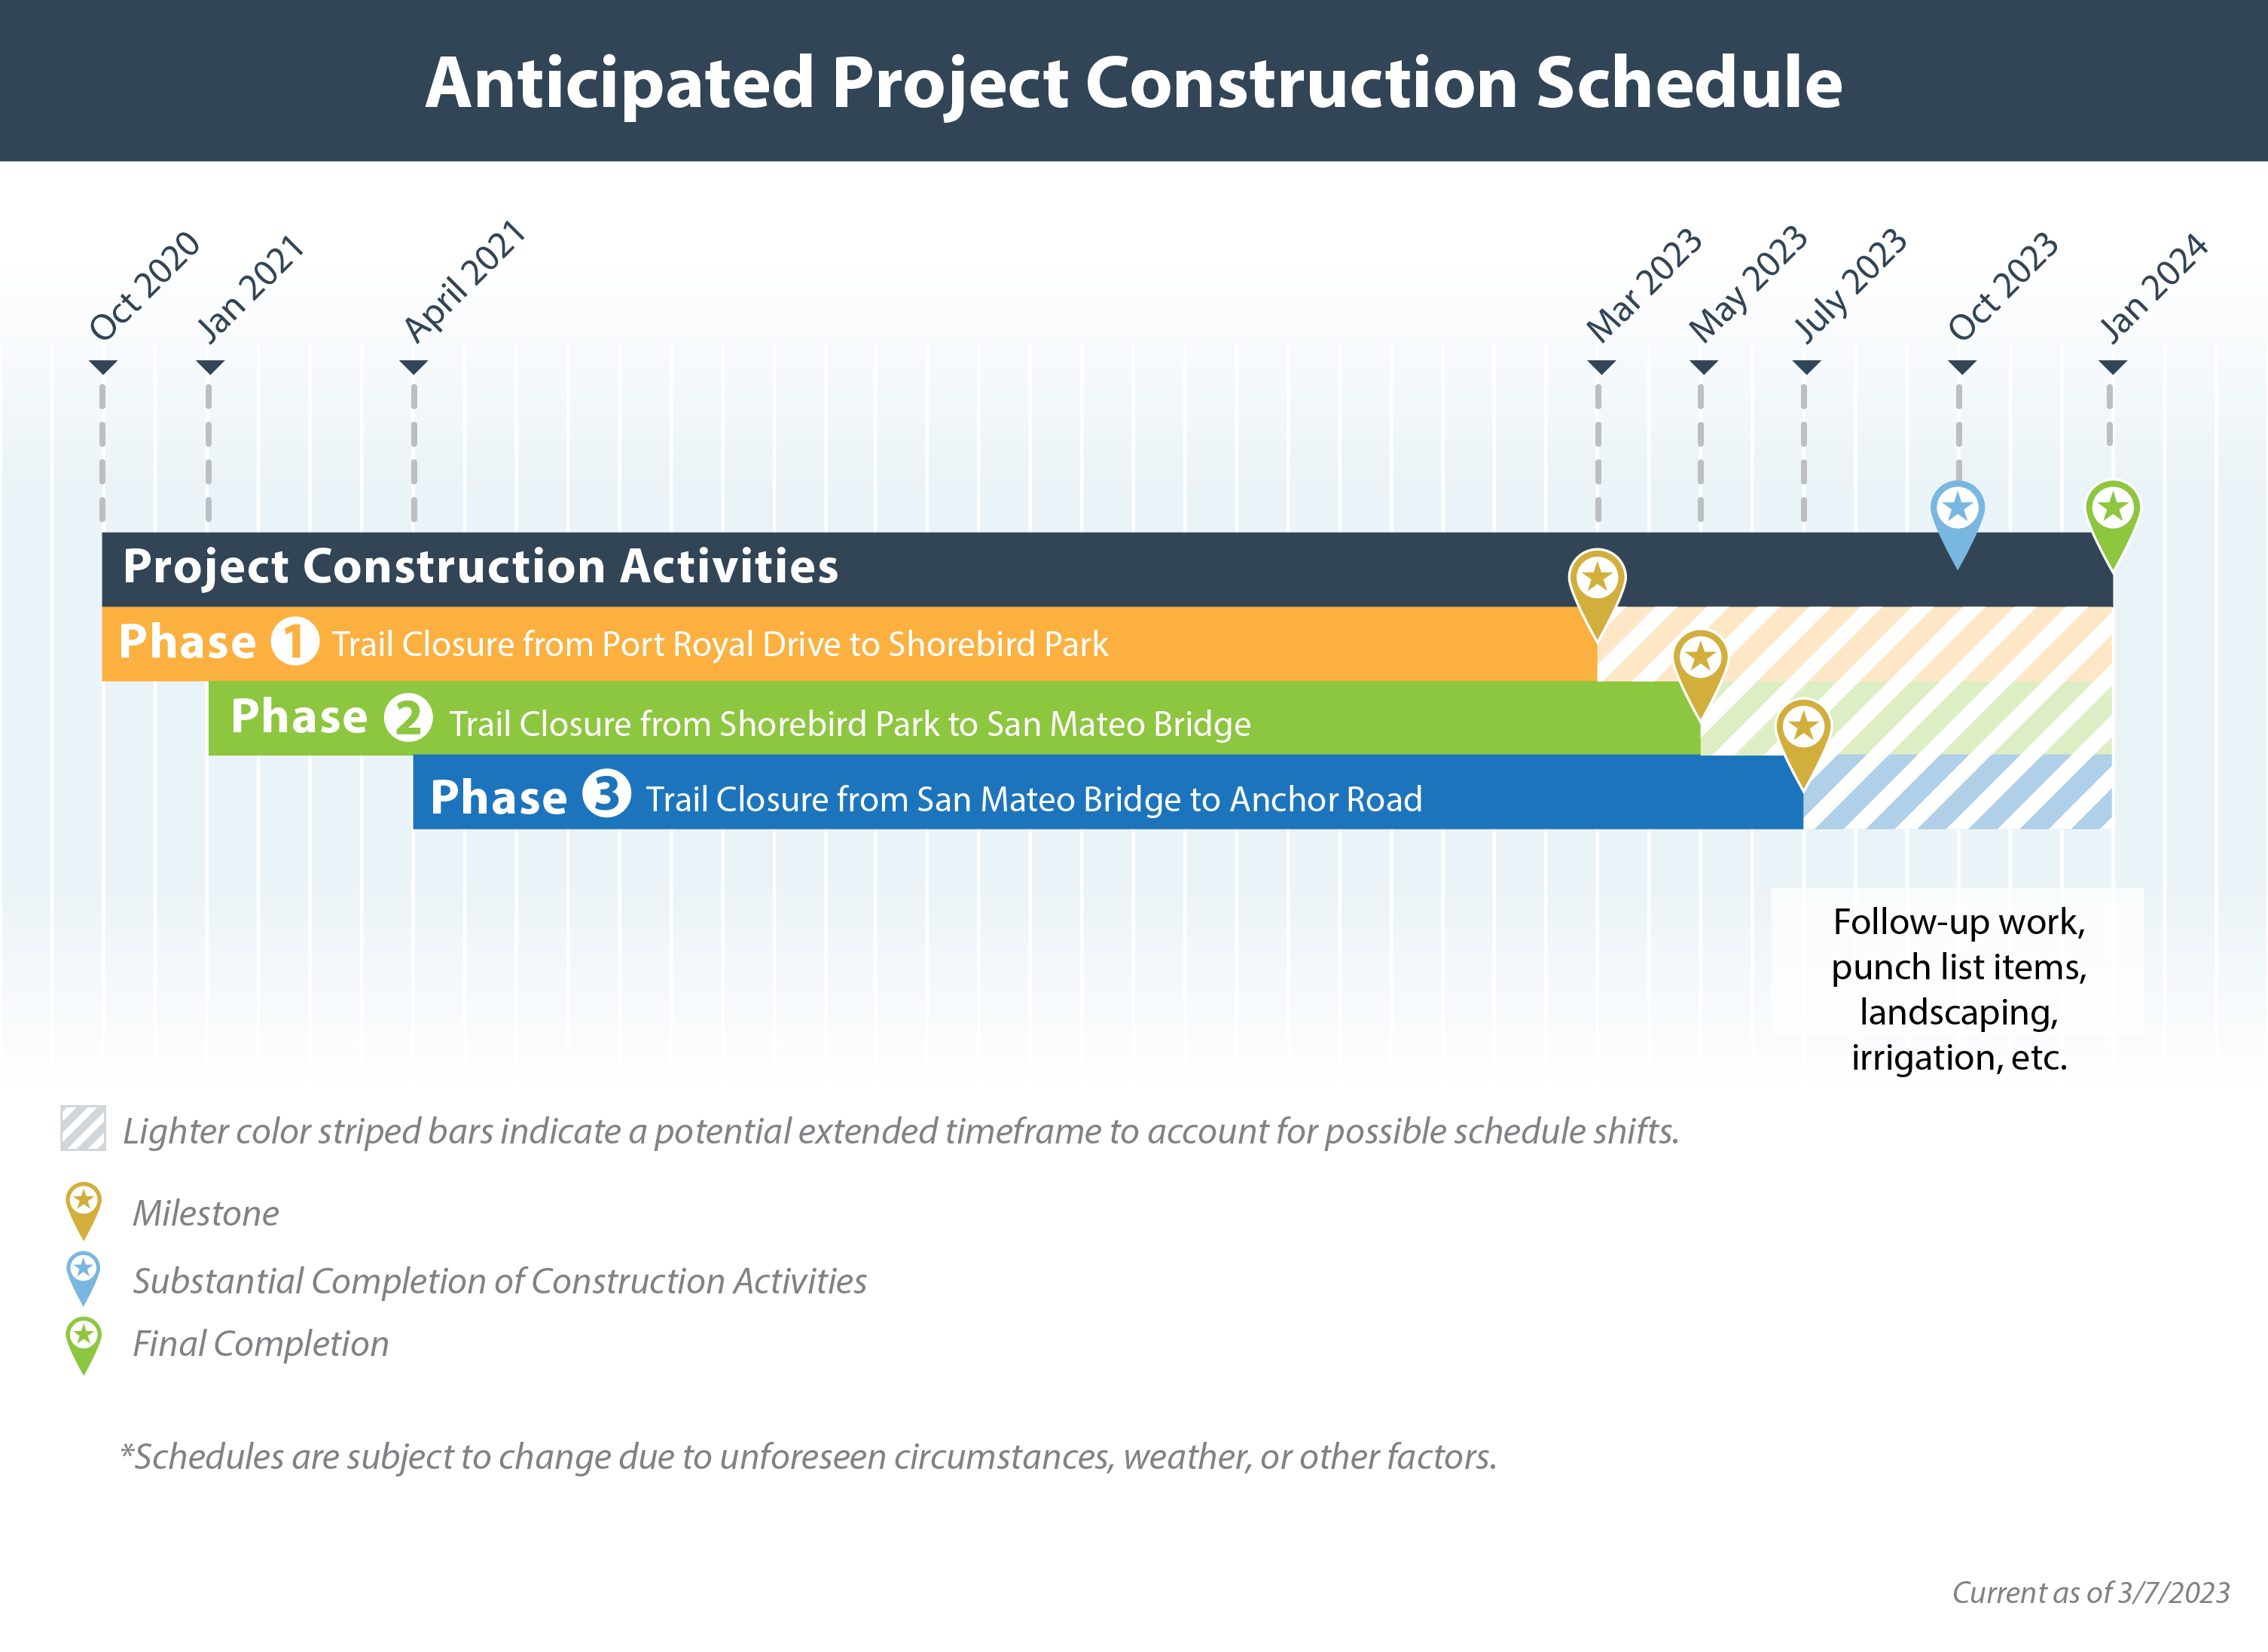 Anticipated Project Construction Schedule from October 2020 to January 2024. Schedules are subject to change due to unforeseen circumstances, weather, or other factors.